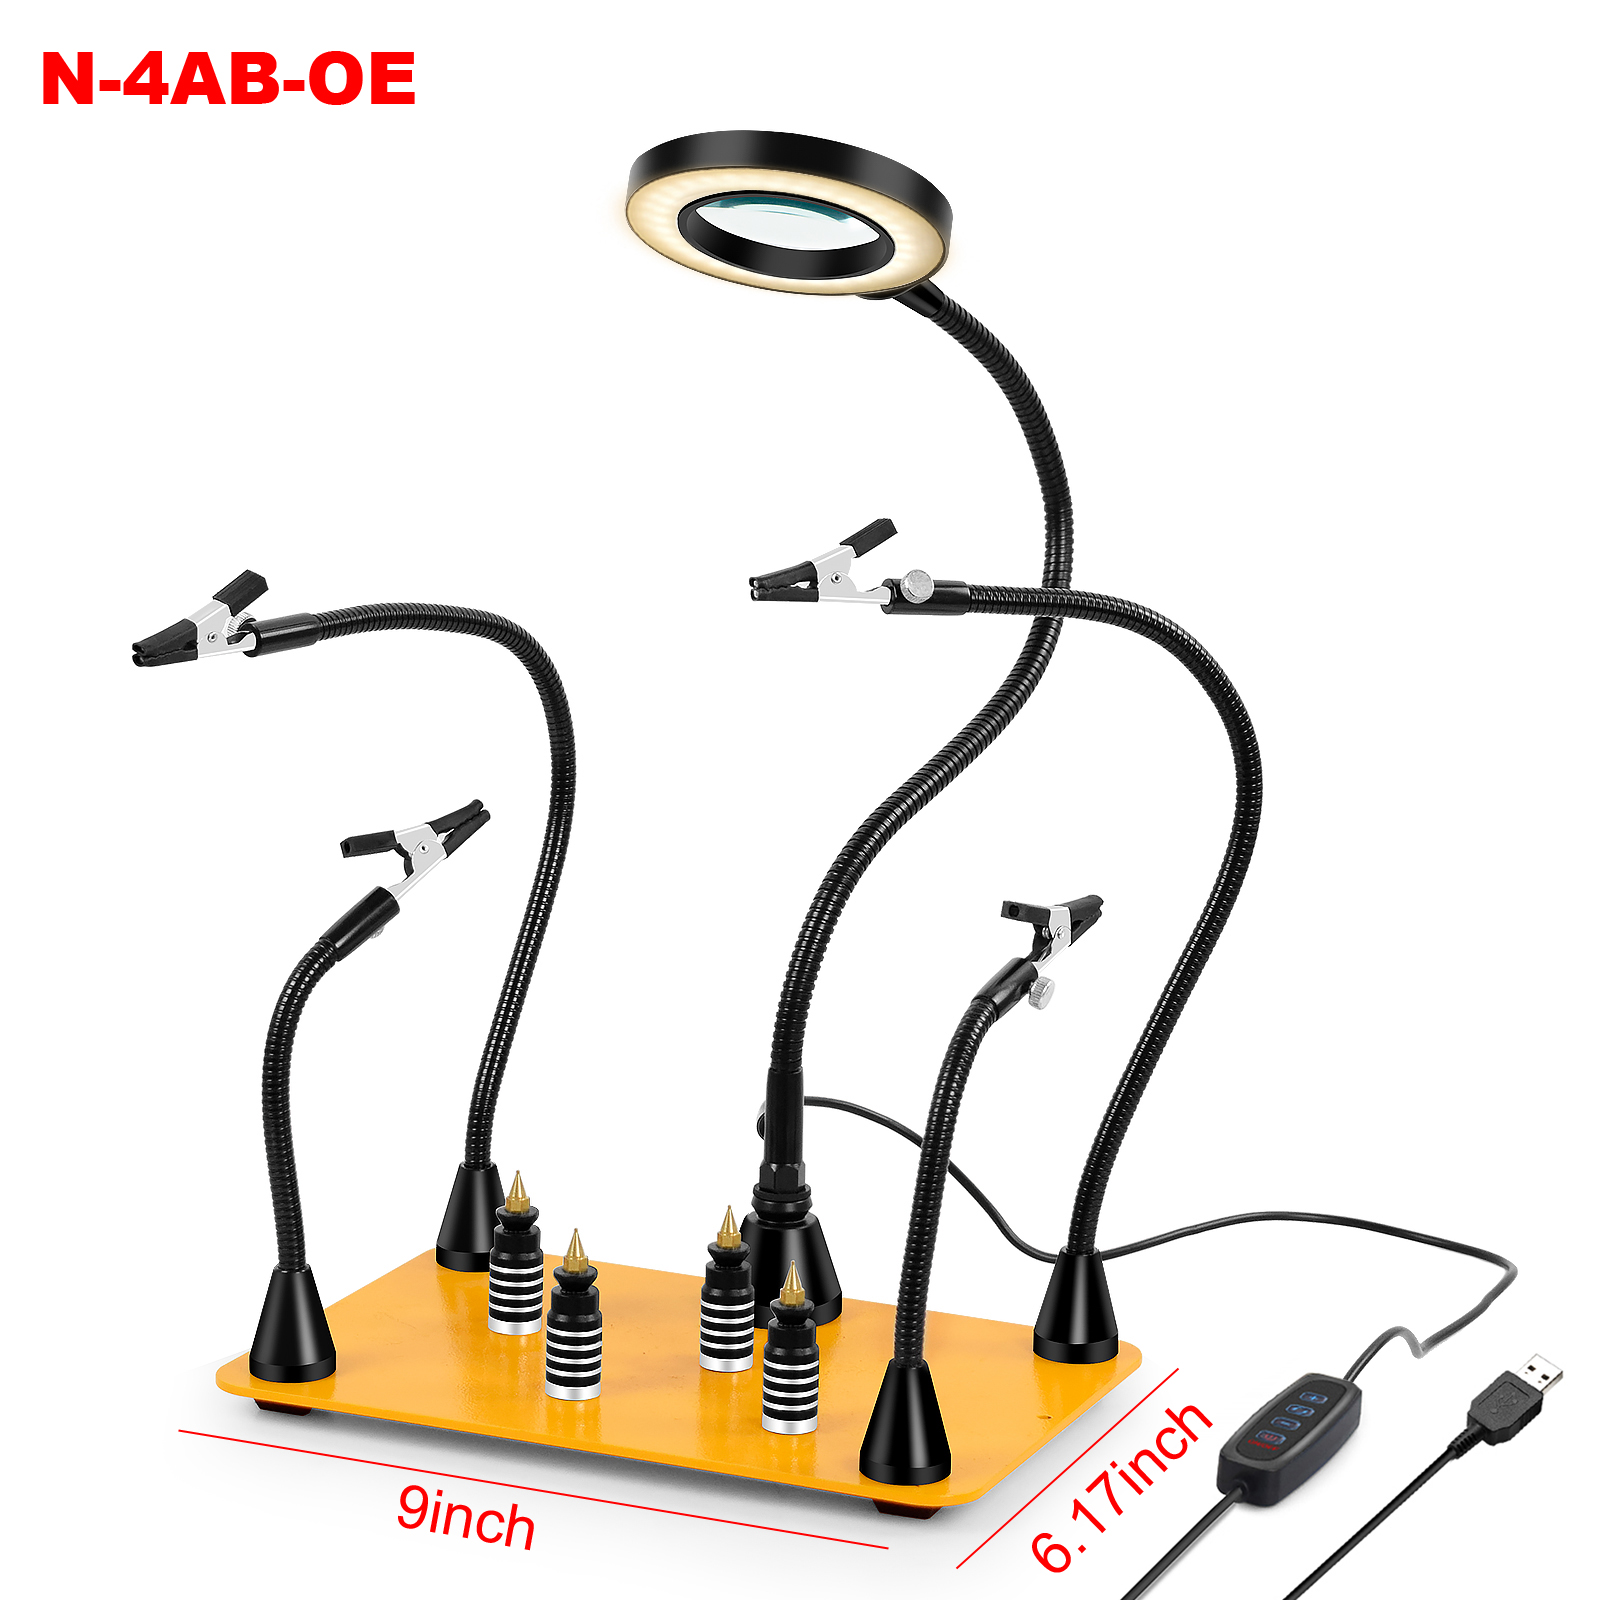 NEWACALOX-Magnetic-Base-Soldering-Welding-Third-Hand-PCB-Holder-with-3X-LED-Illuminated-Magnifier-La-1921650-4